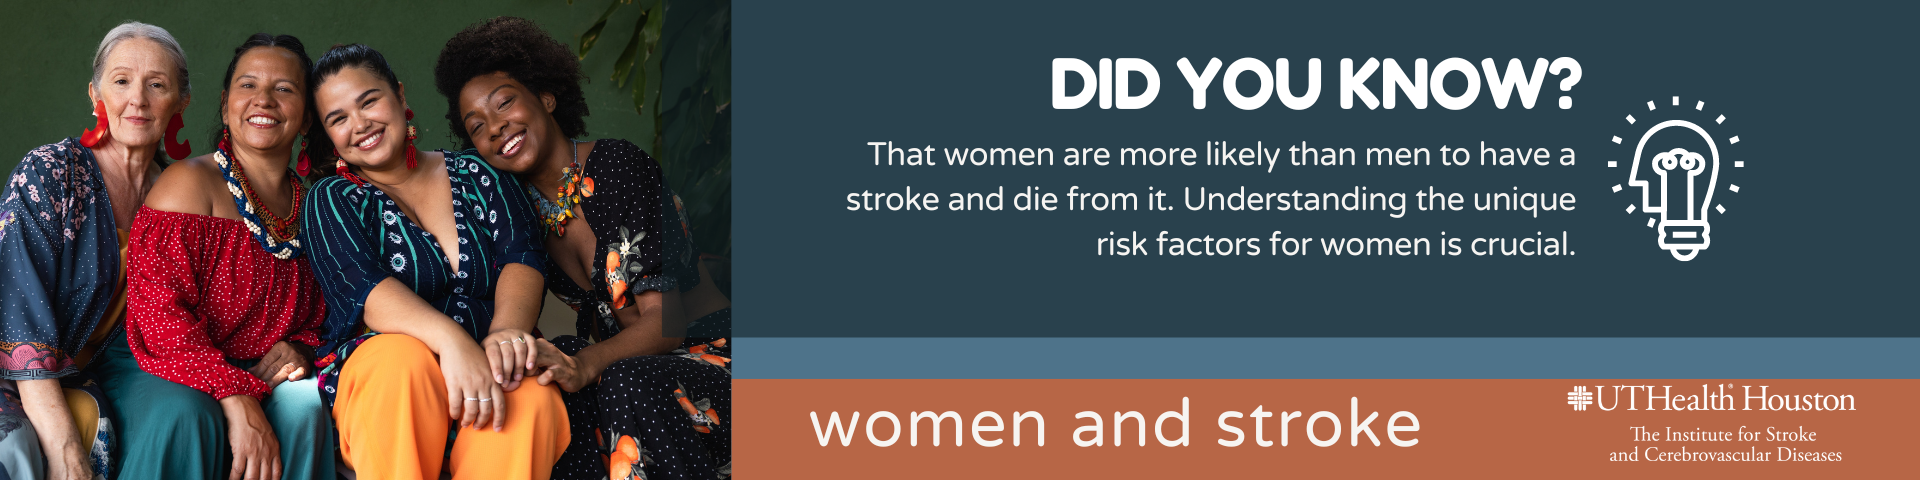 Did-You-Know_Women-are-more-likely-to-die-from-stroke.png